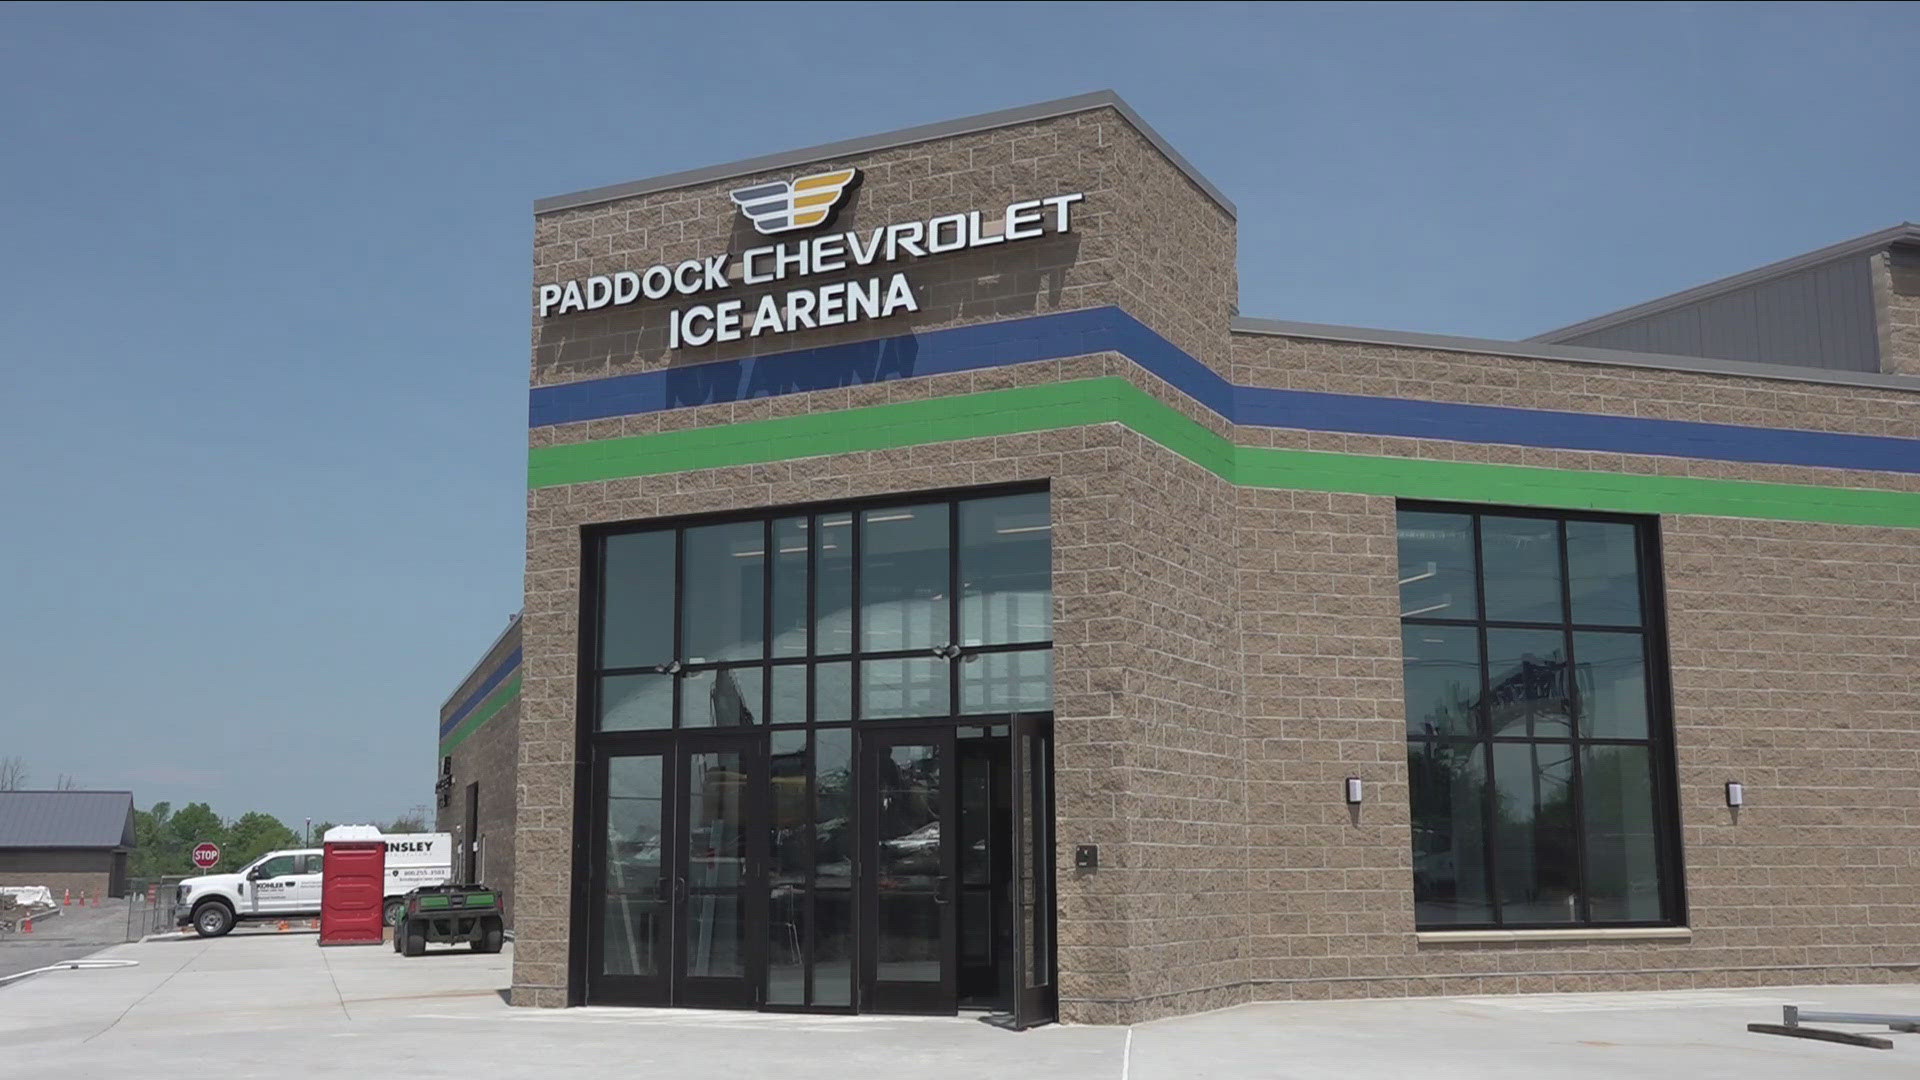 THE PLAN IS FOR THE ICE ARENA TO HOLD TOURNAMENTS THAT BRING MORE PEOPLE TO THE AREA... AND FACILITY CAN ALSO BE RESERVED AS A PRACTICE SPACE.